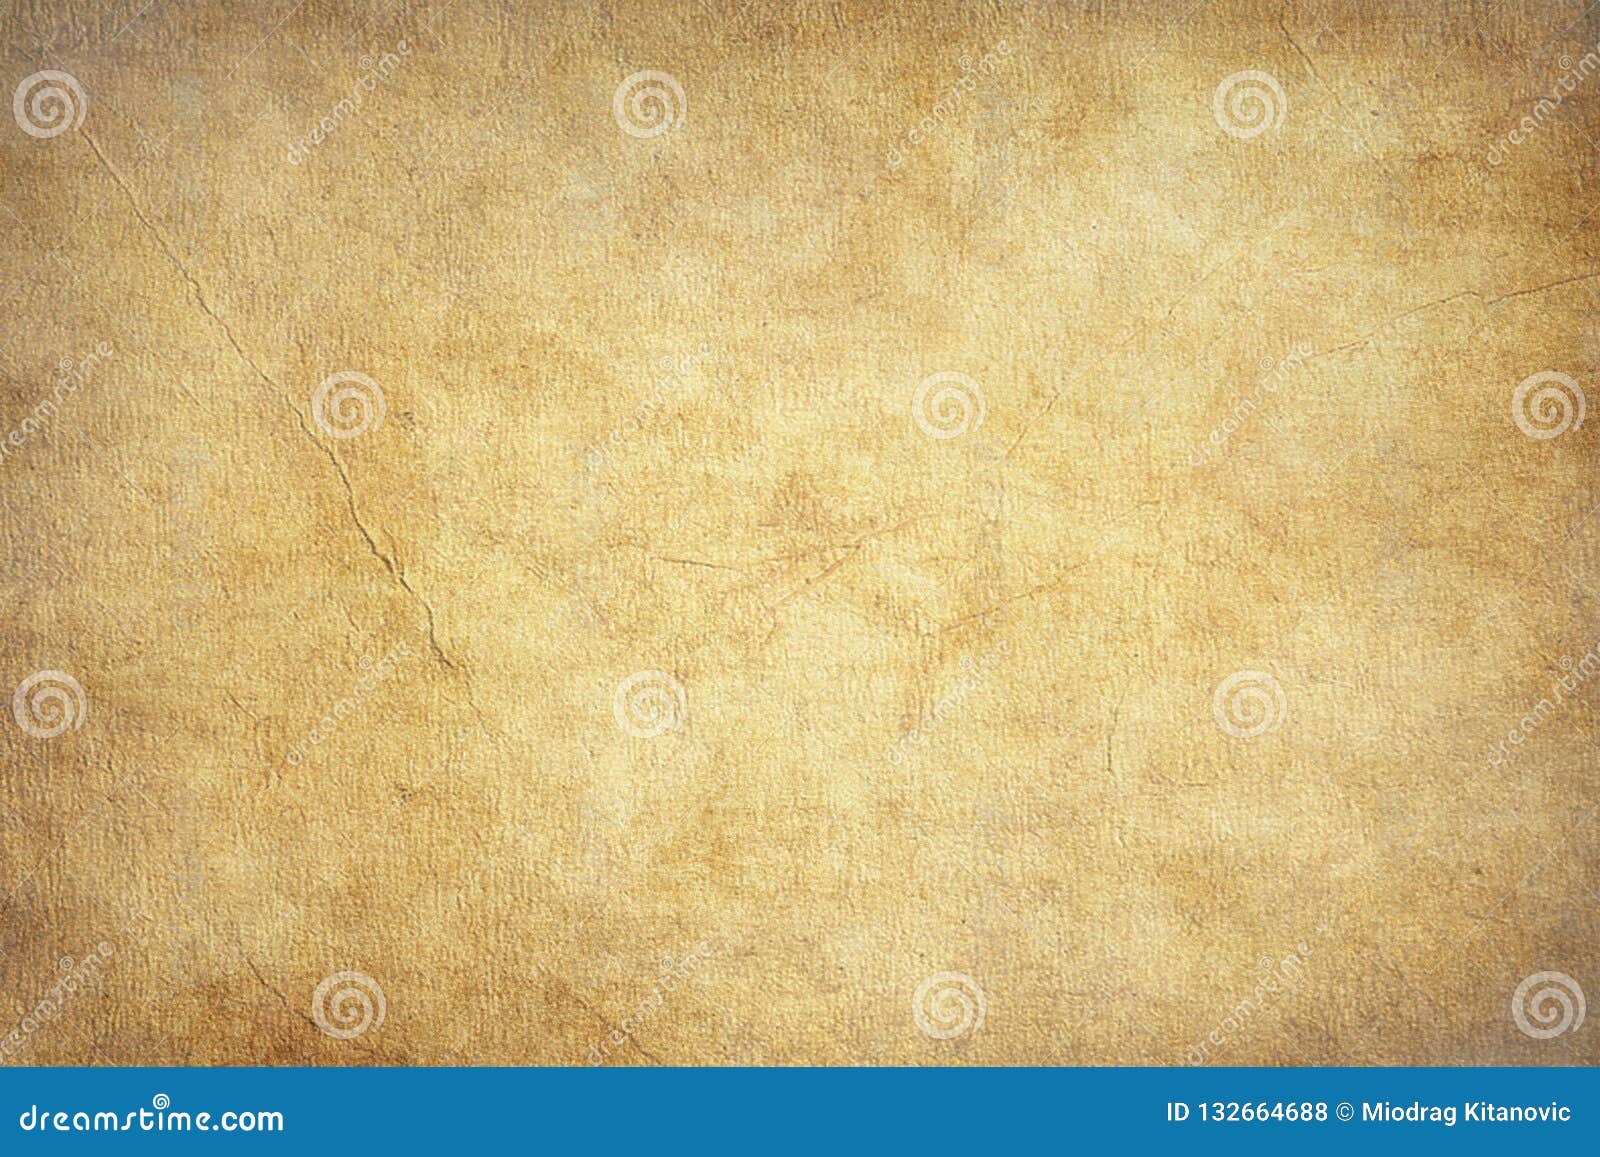 Old Paper Scroll Photo And Wallpaper Free Use S Ibackgroundz - Old Paper  Scroll Gif, HD Png Download , Transparent Png Image - PNGitem